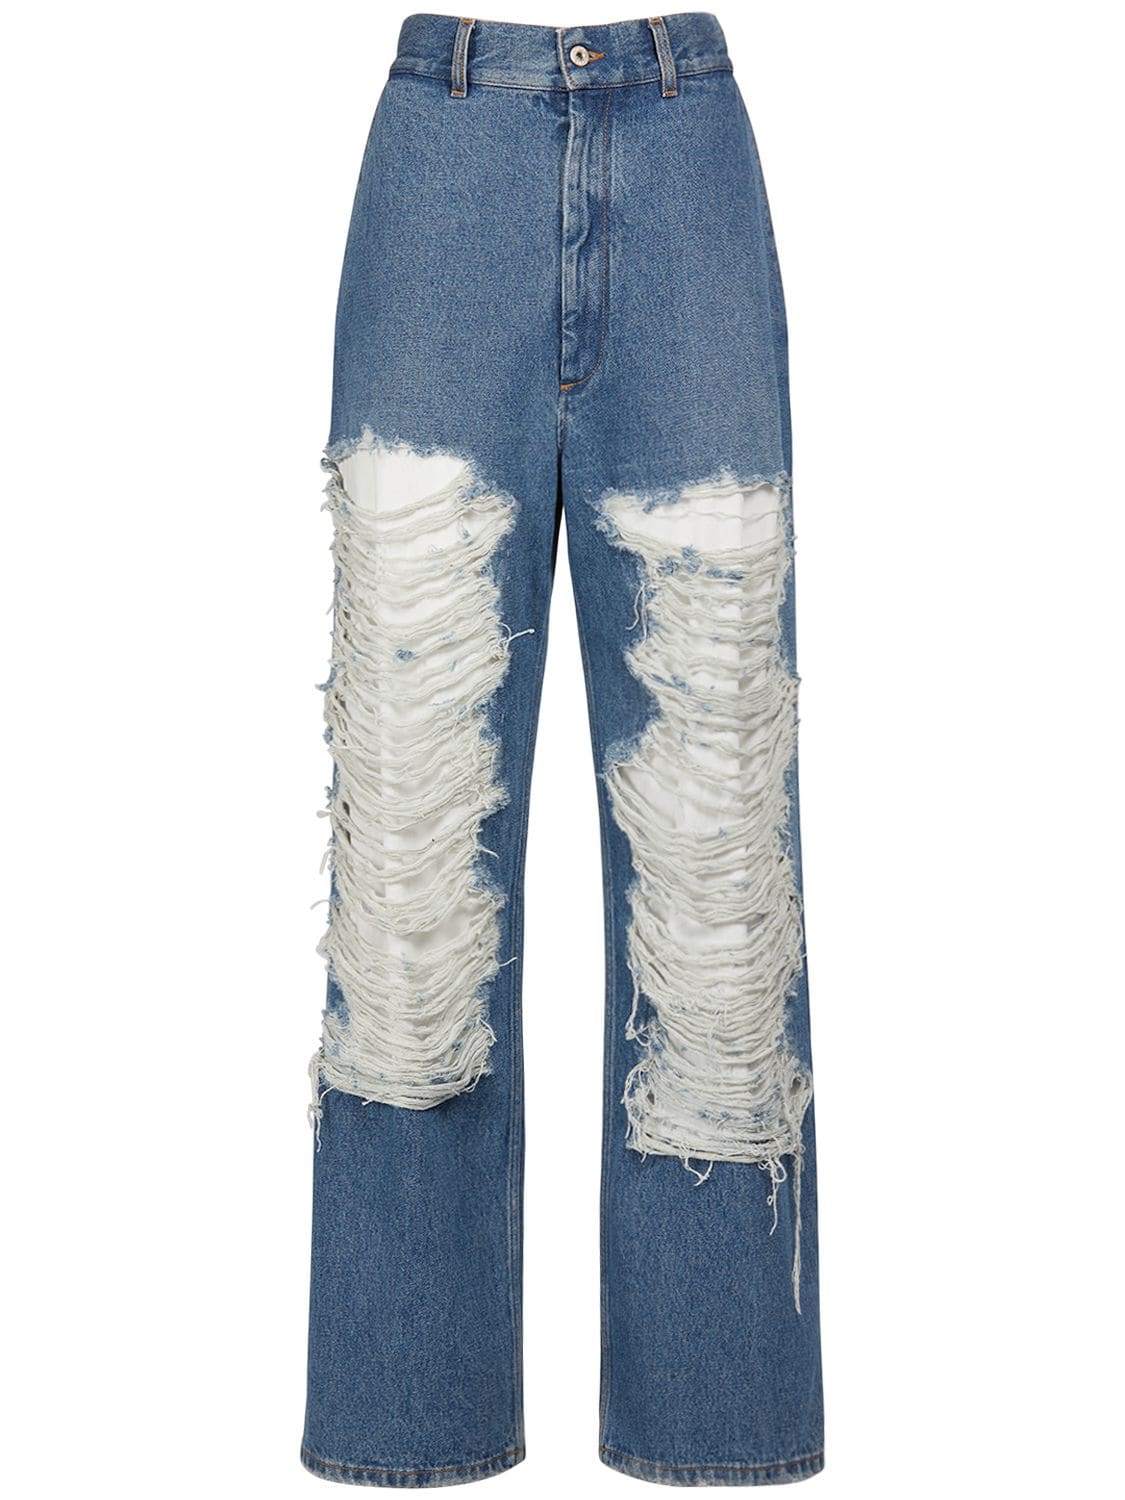 Ripped Cotton Denim Baggy Jeans